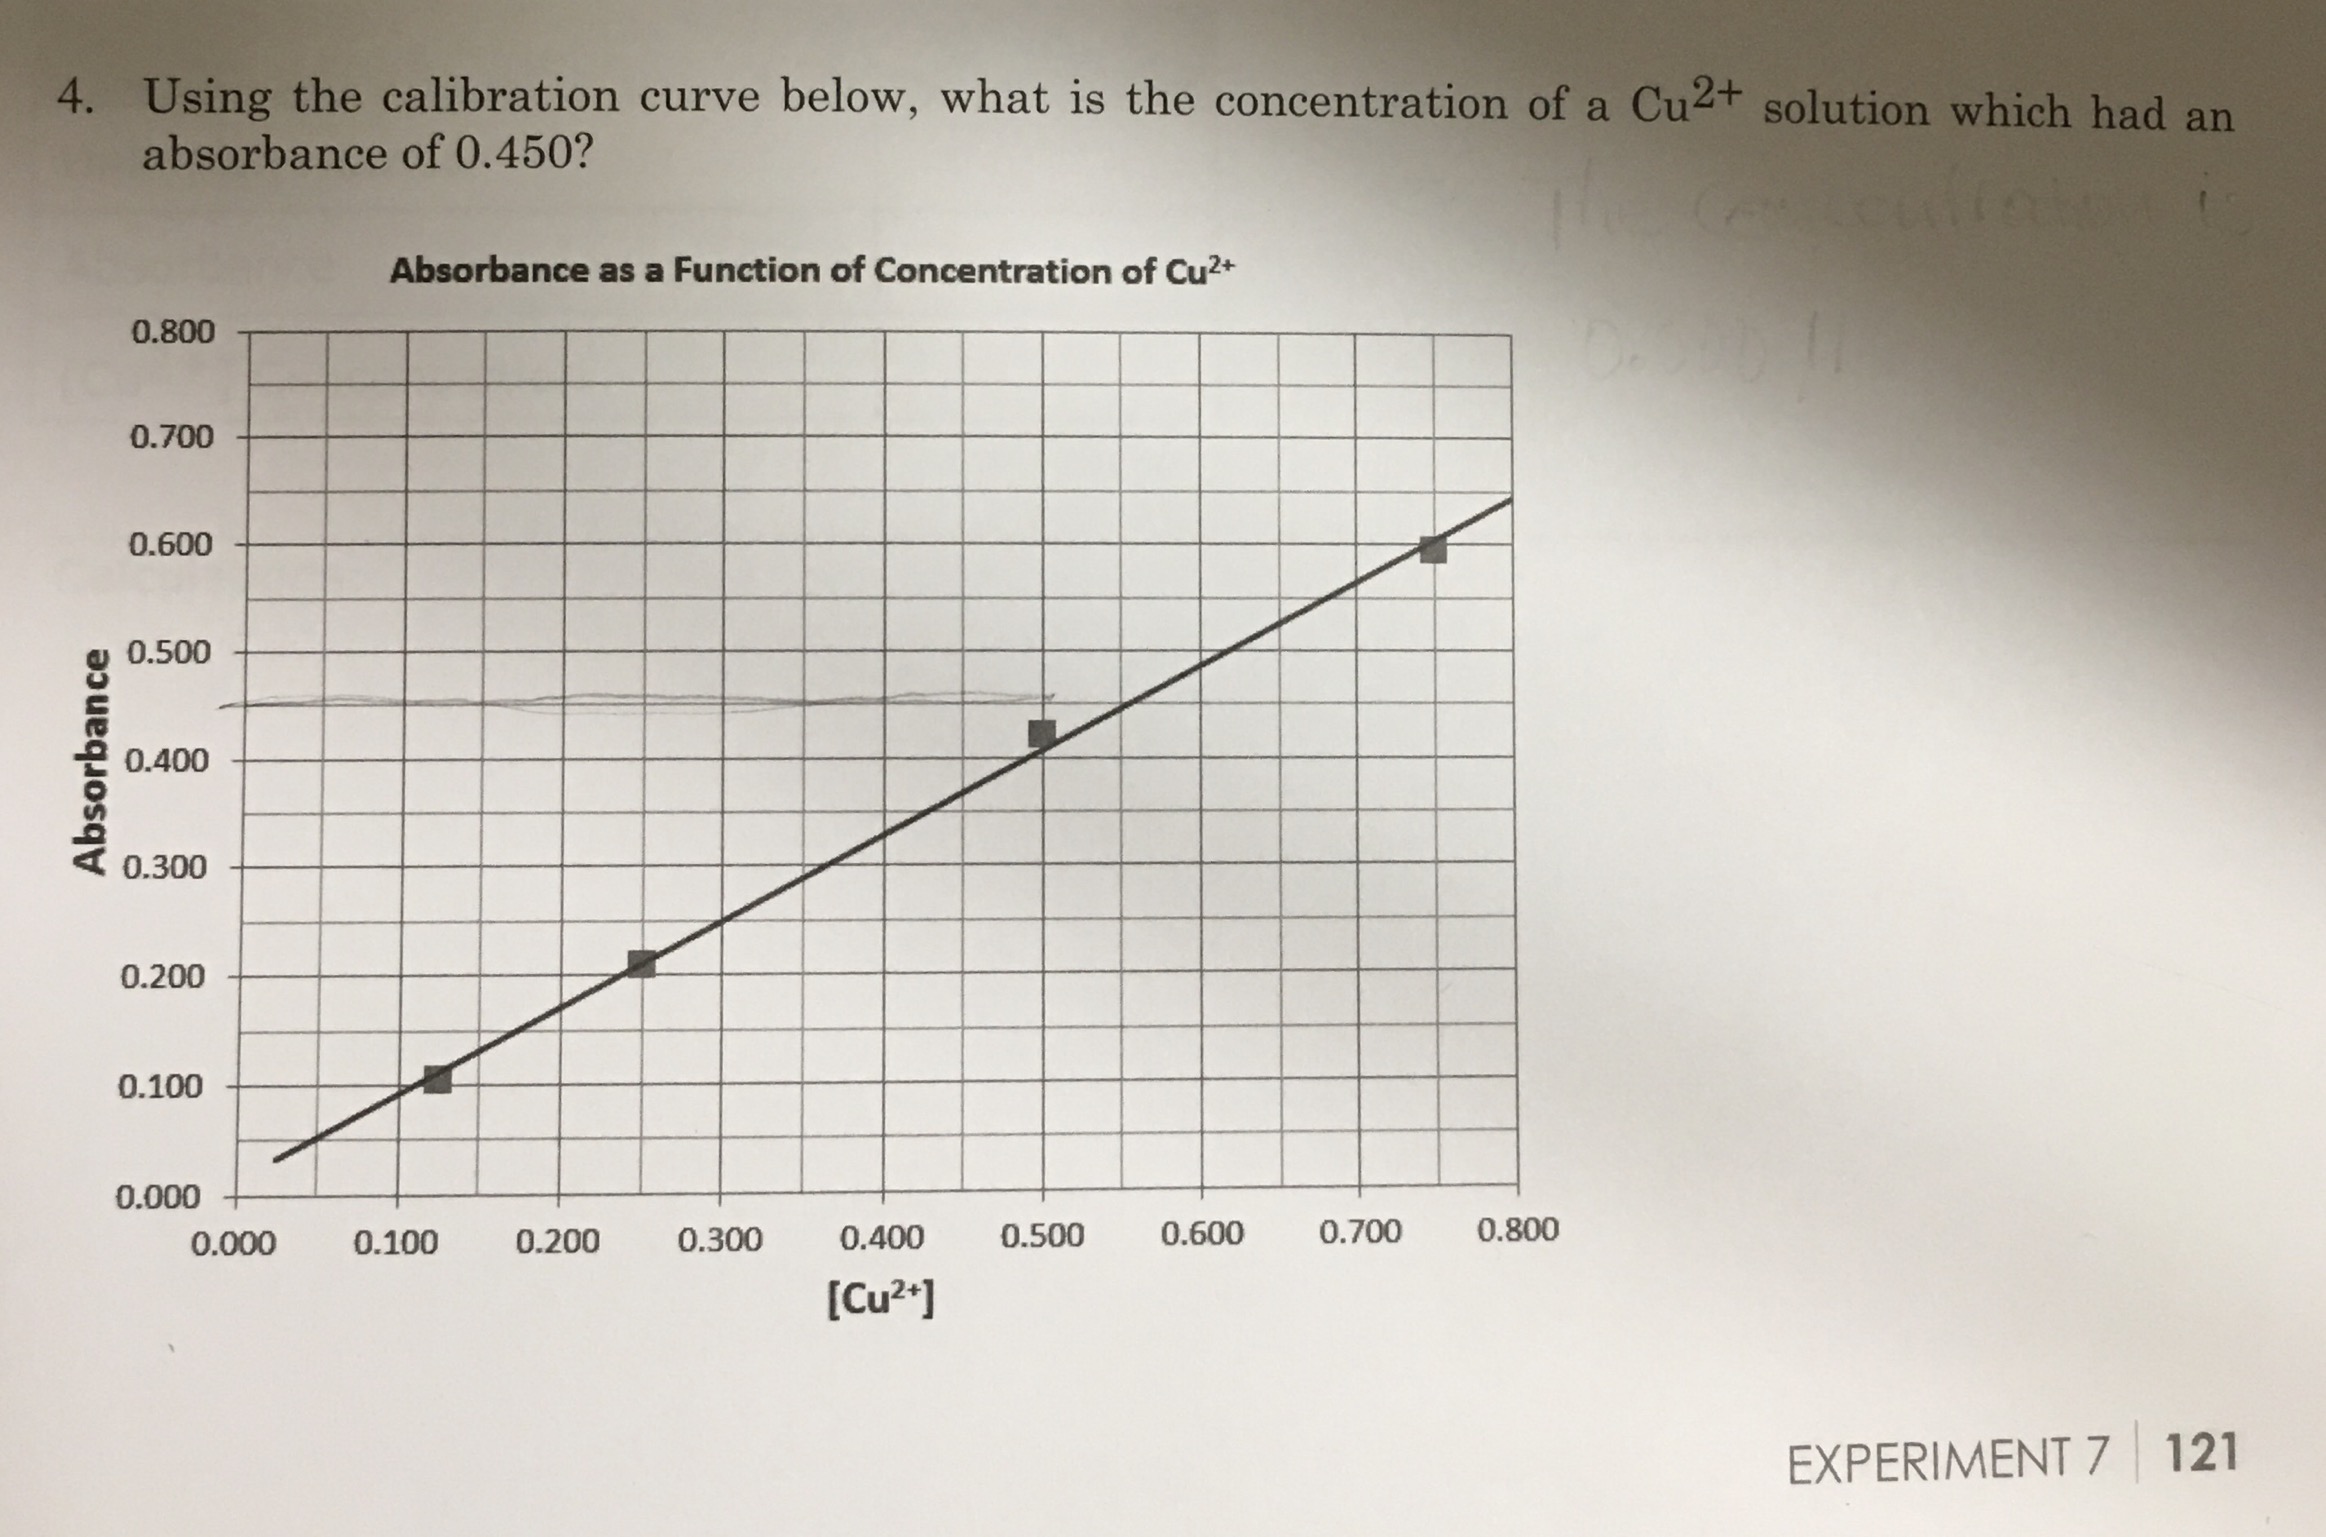 4. Using the calibration curve below, what is the concentration of a Cu2t solution which had an
absorbance of 0.450?
Absorbance as a Function of Concentration of Cu2+
0.800
0.700
0.600
0.500
0.400
0.300
0.200
0.100
0.000
0.800
0.700
0.600
0.500
0.400
0.300
0.100
0.200
0.000
[Cu2]
EXPERIMENT 7 121
Absorbance
